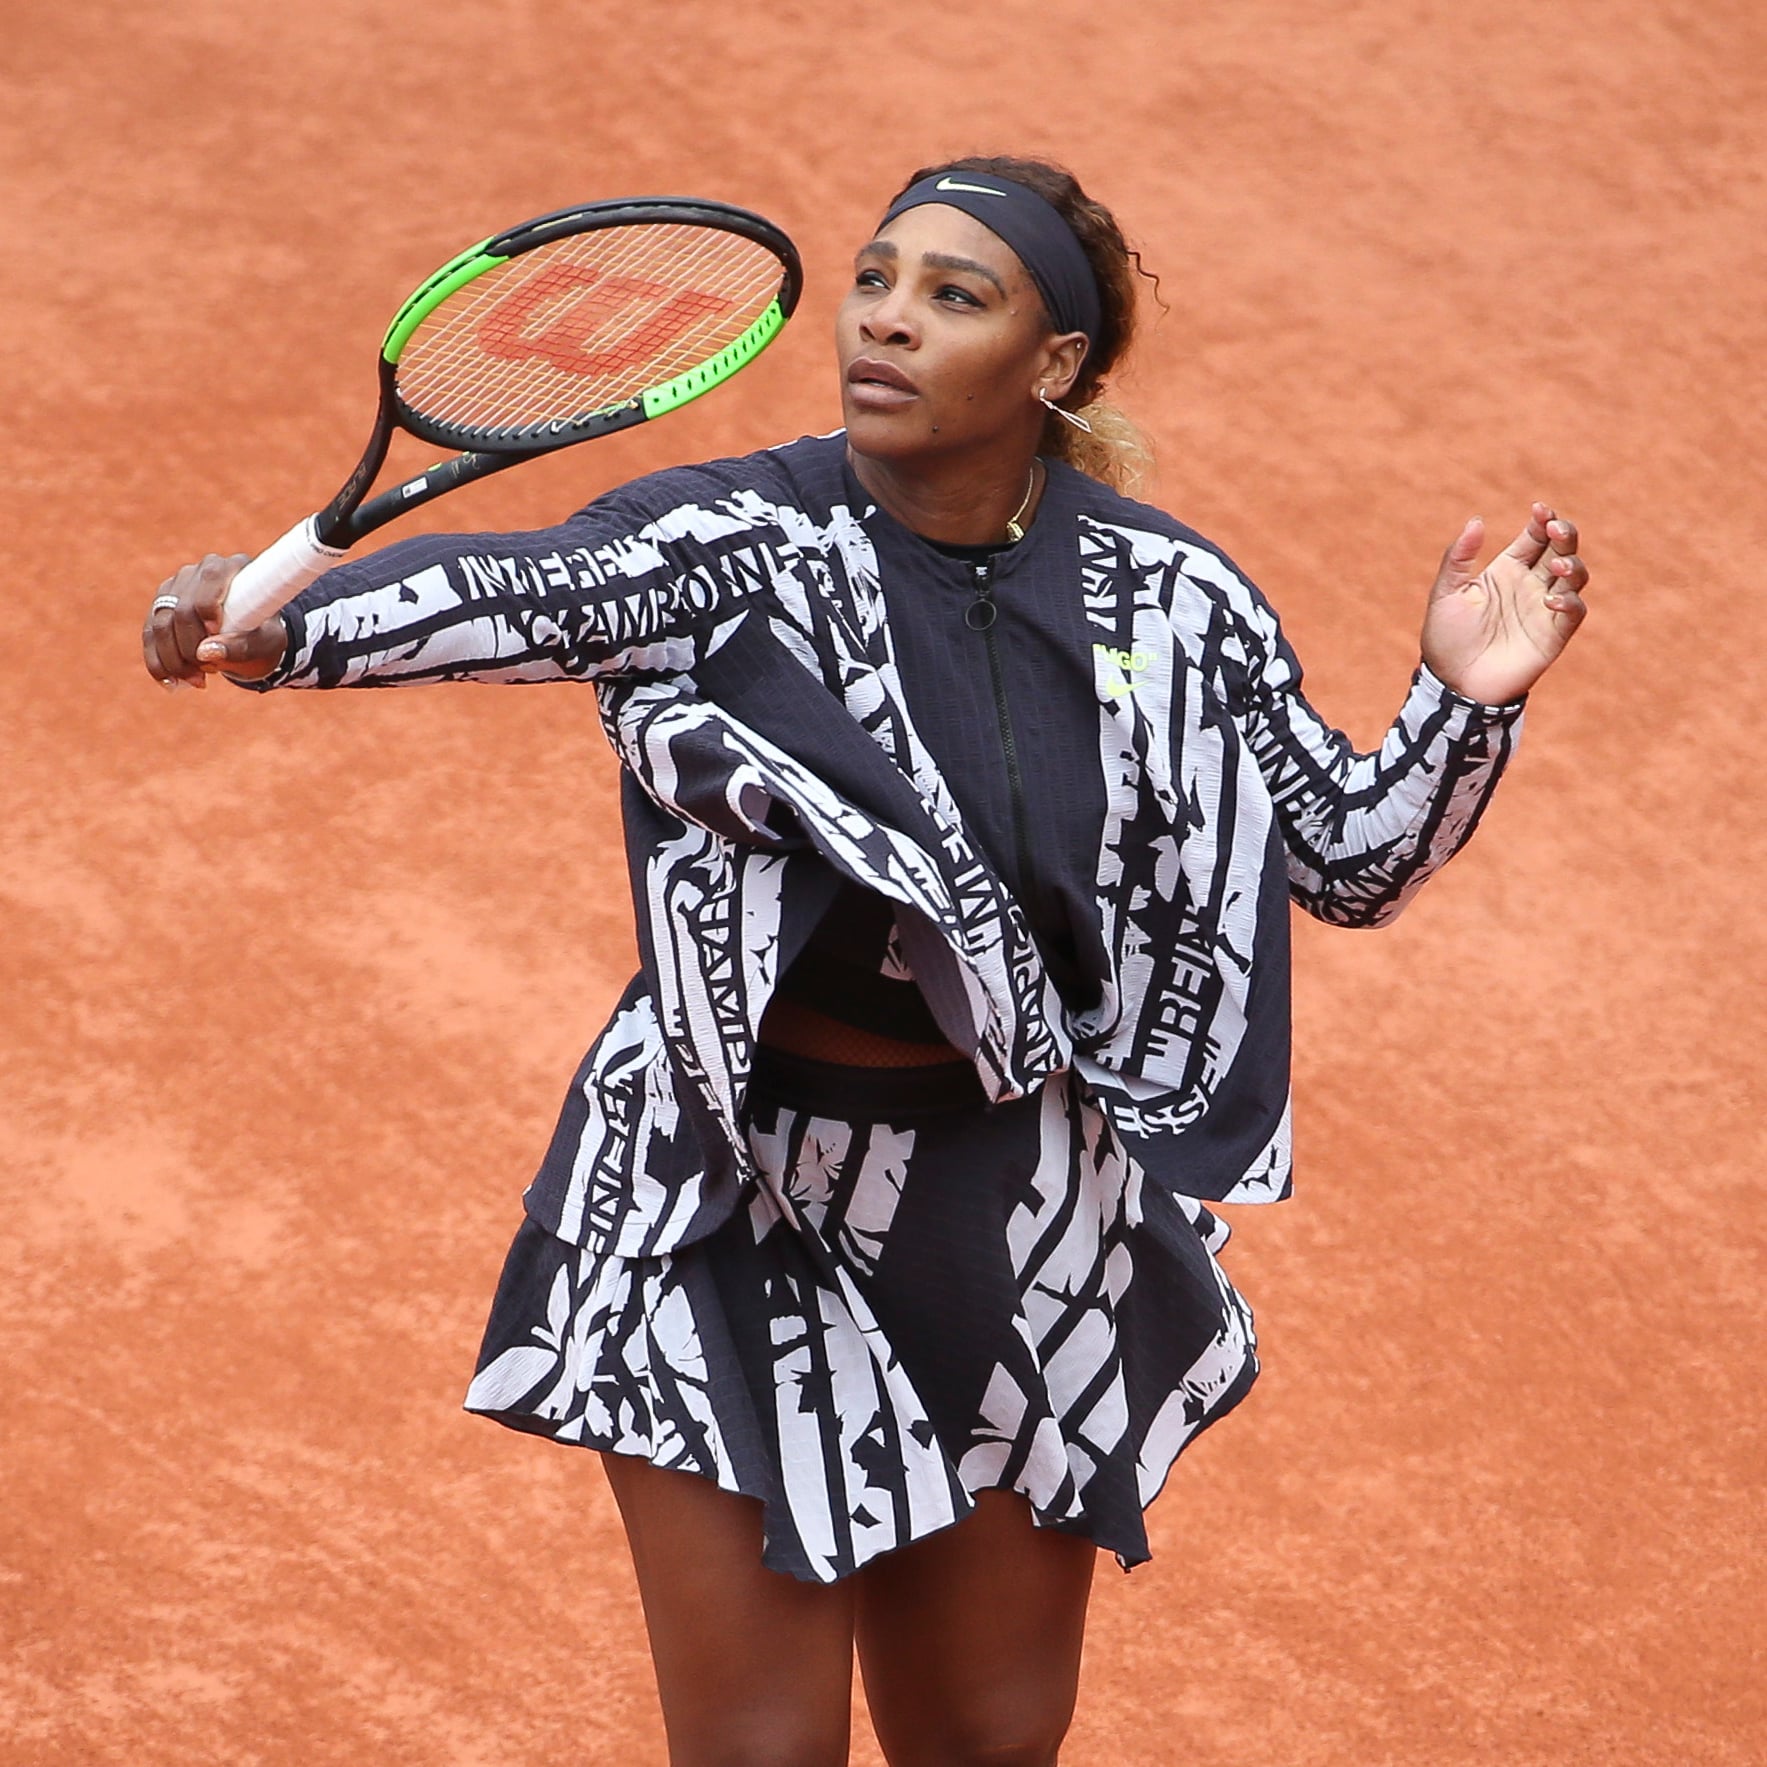 Serena Off With Text 2019 French Open | POPSUGAR Fashion